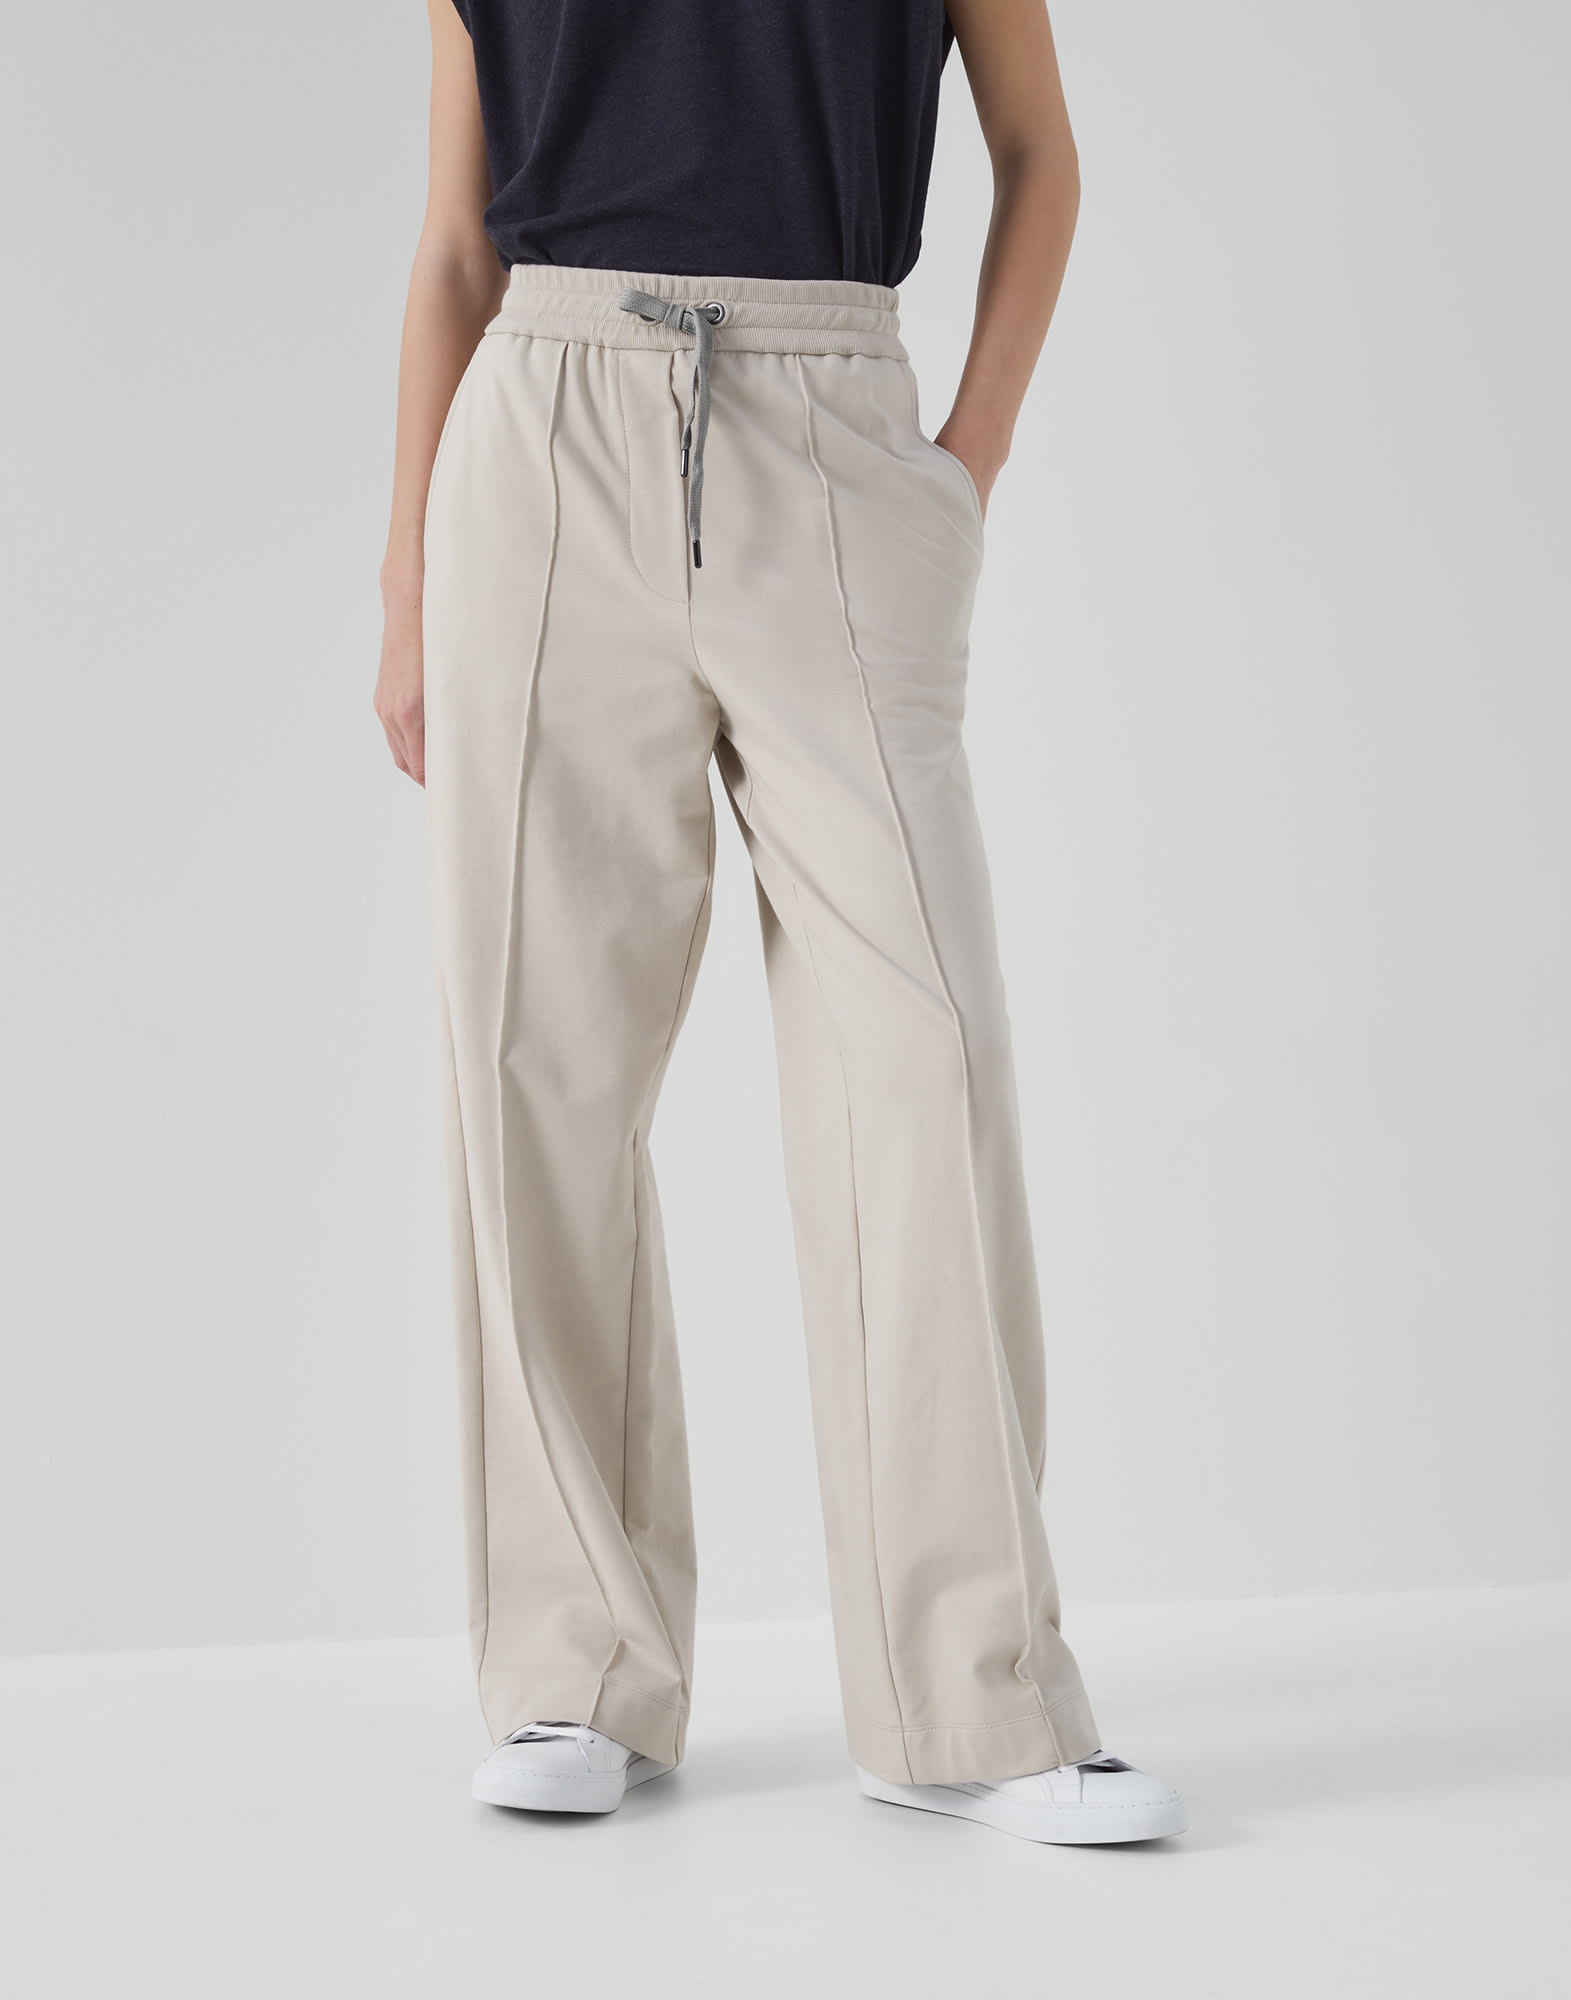 Lightweight French terry trousers